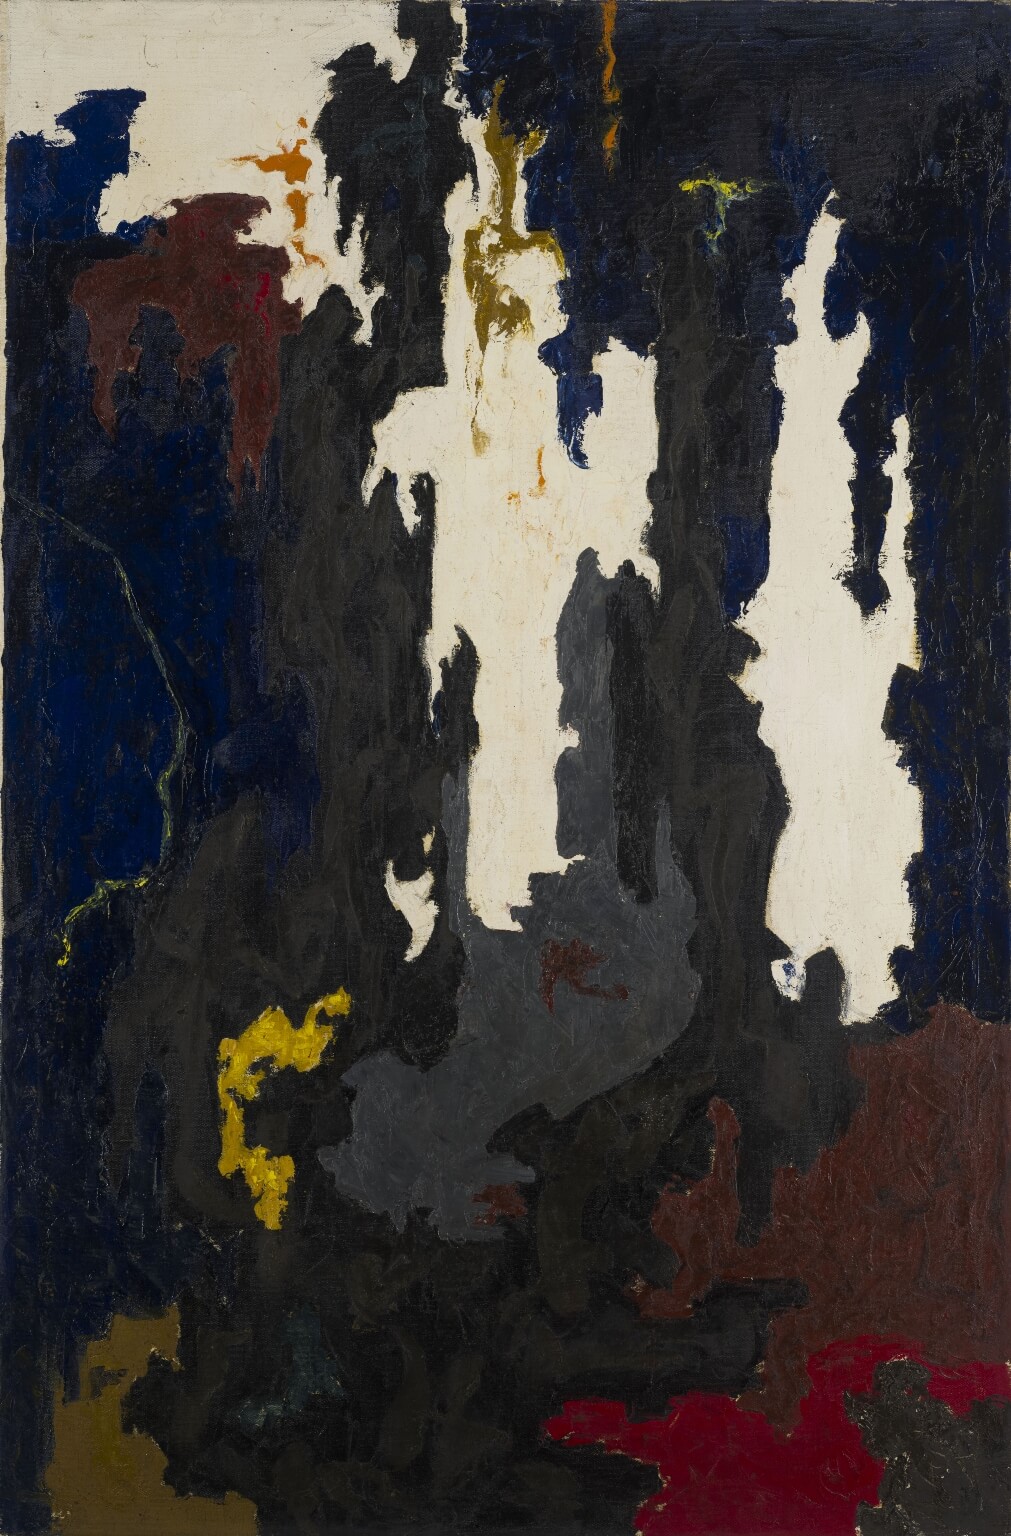 Vertical abstract painting with three sections of bare canvas and mostly black paint, with some gray, blue, red, and yellow